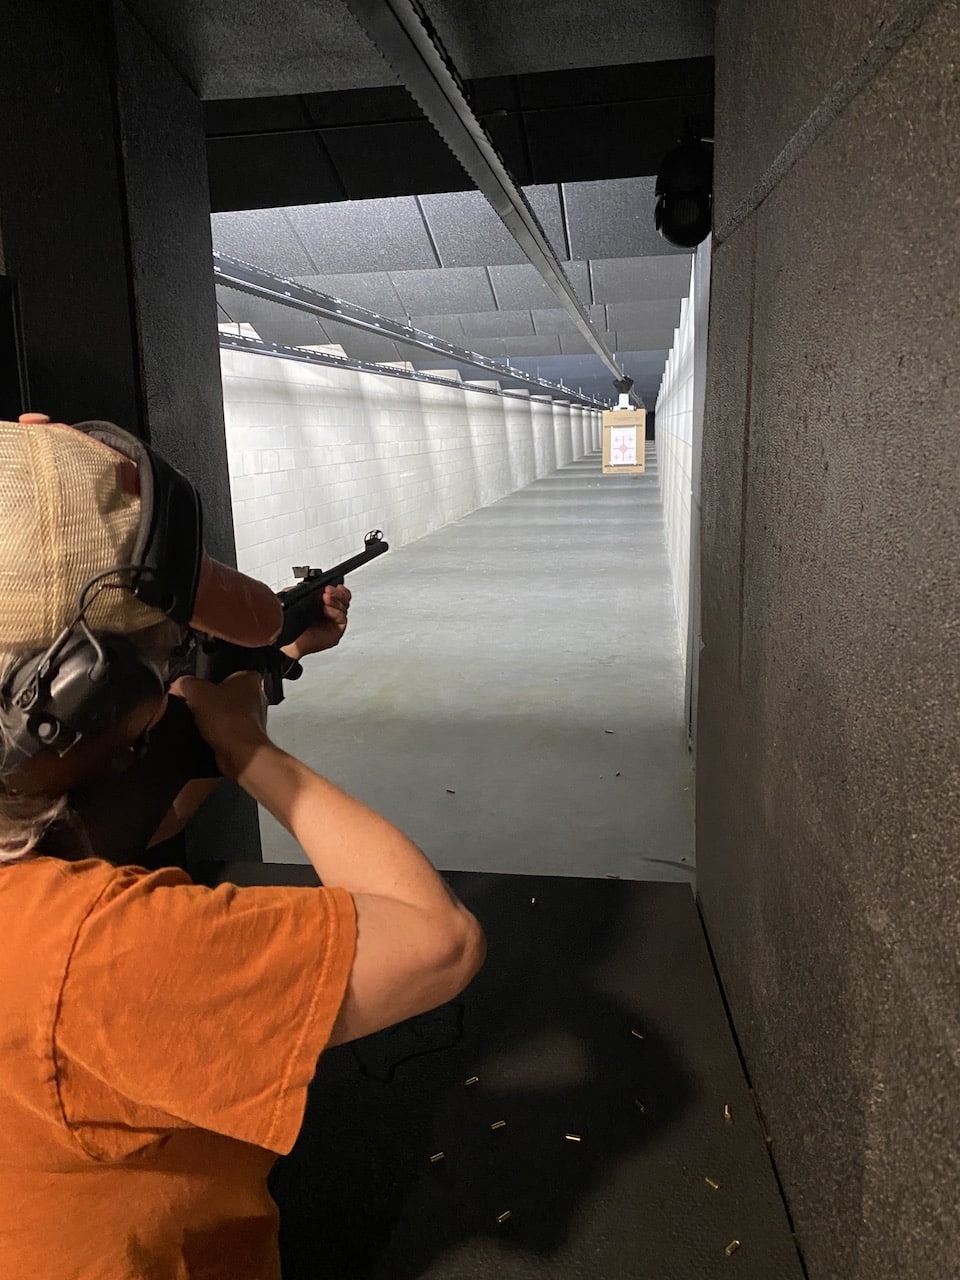 Shooting the Rossi RB22 Compact